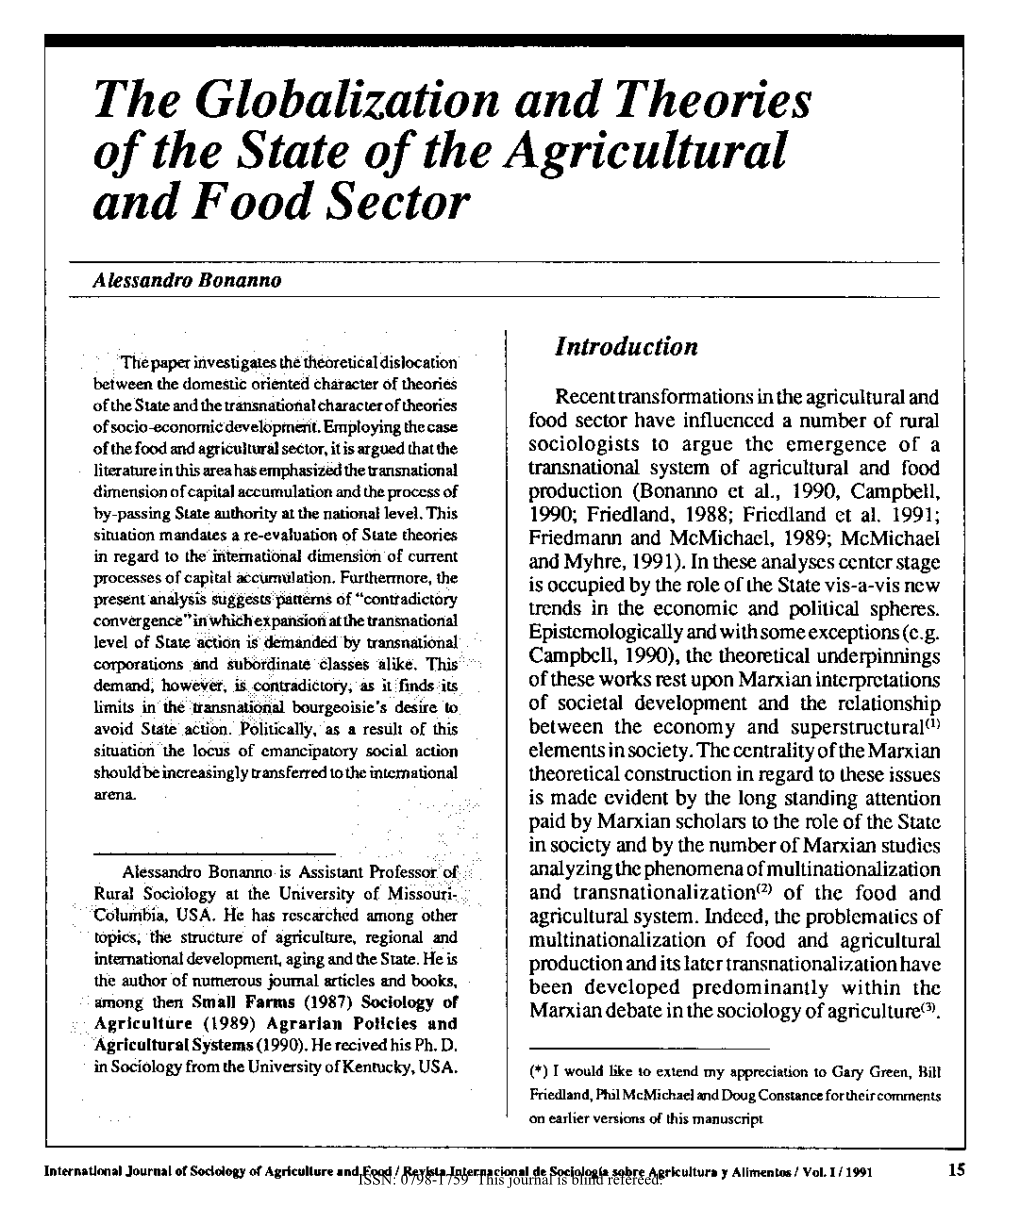 The Globalization and Theories of the State of the Agricultural and Food Sector